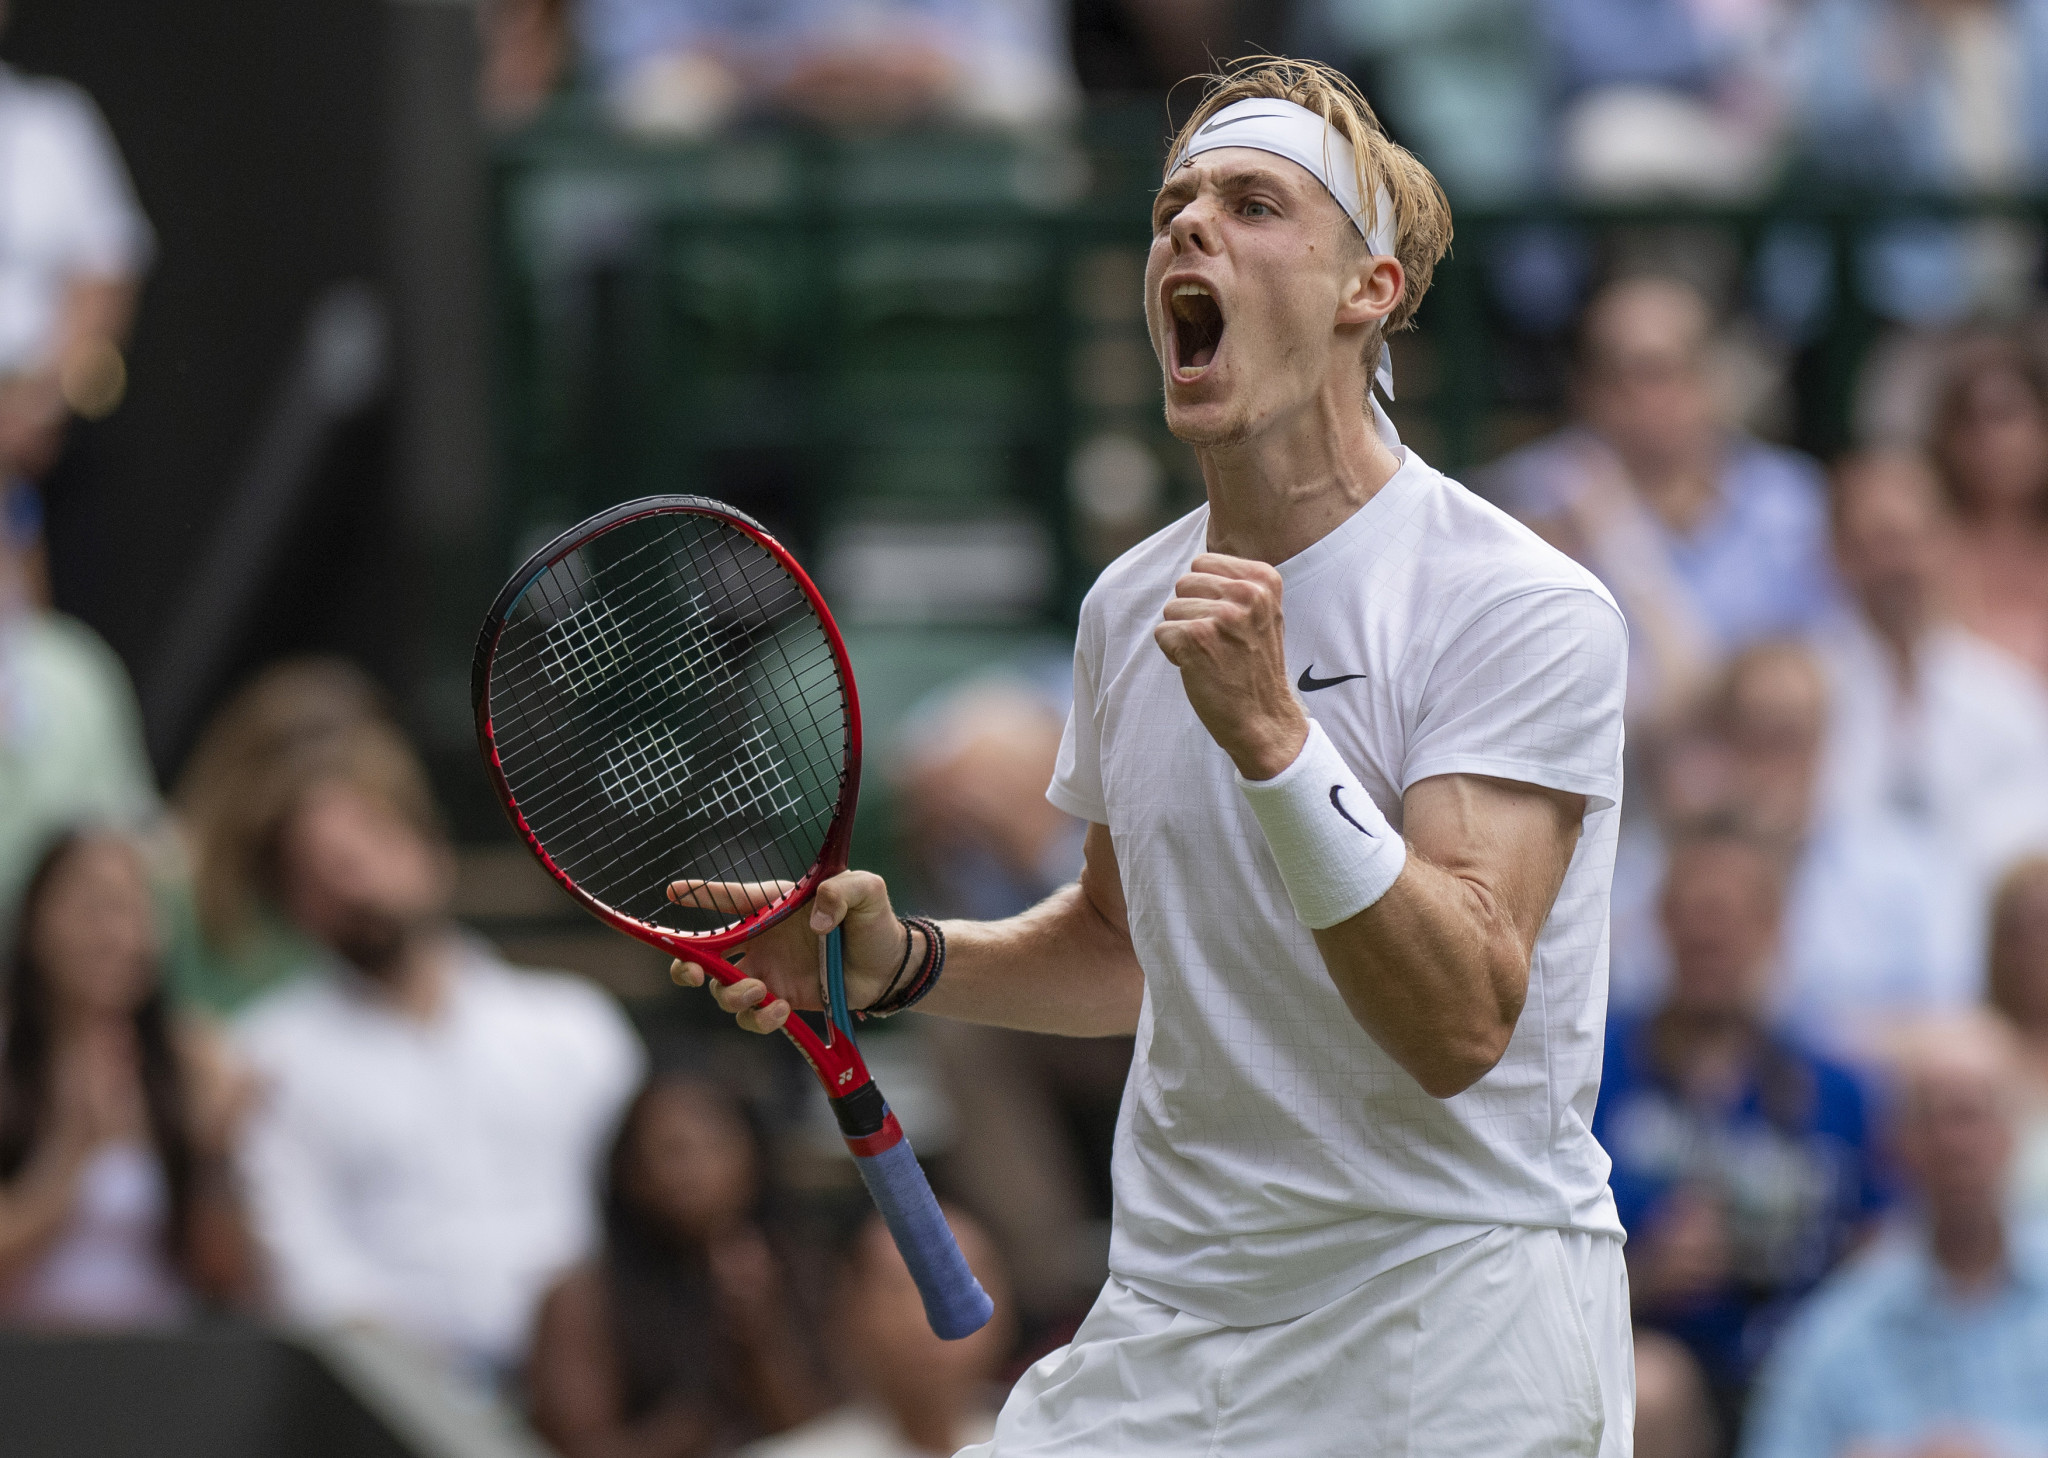 Denis Shapovalov beat Andy Murray in straight sets to reach the last 16 at Wimbledon for the first time ©Getty Images